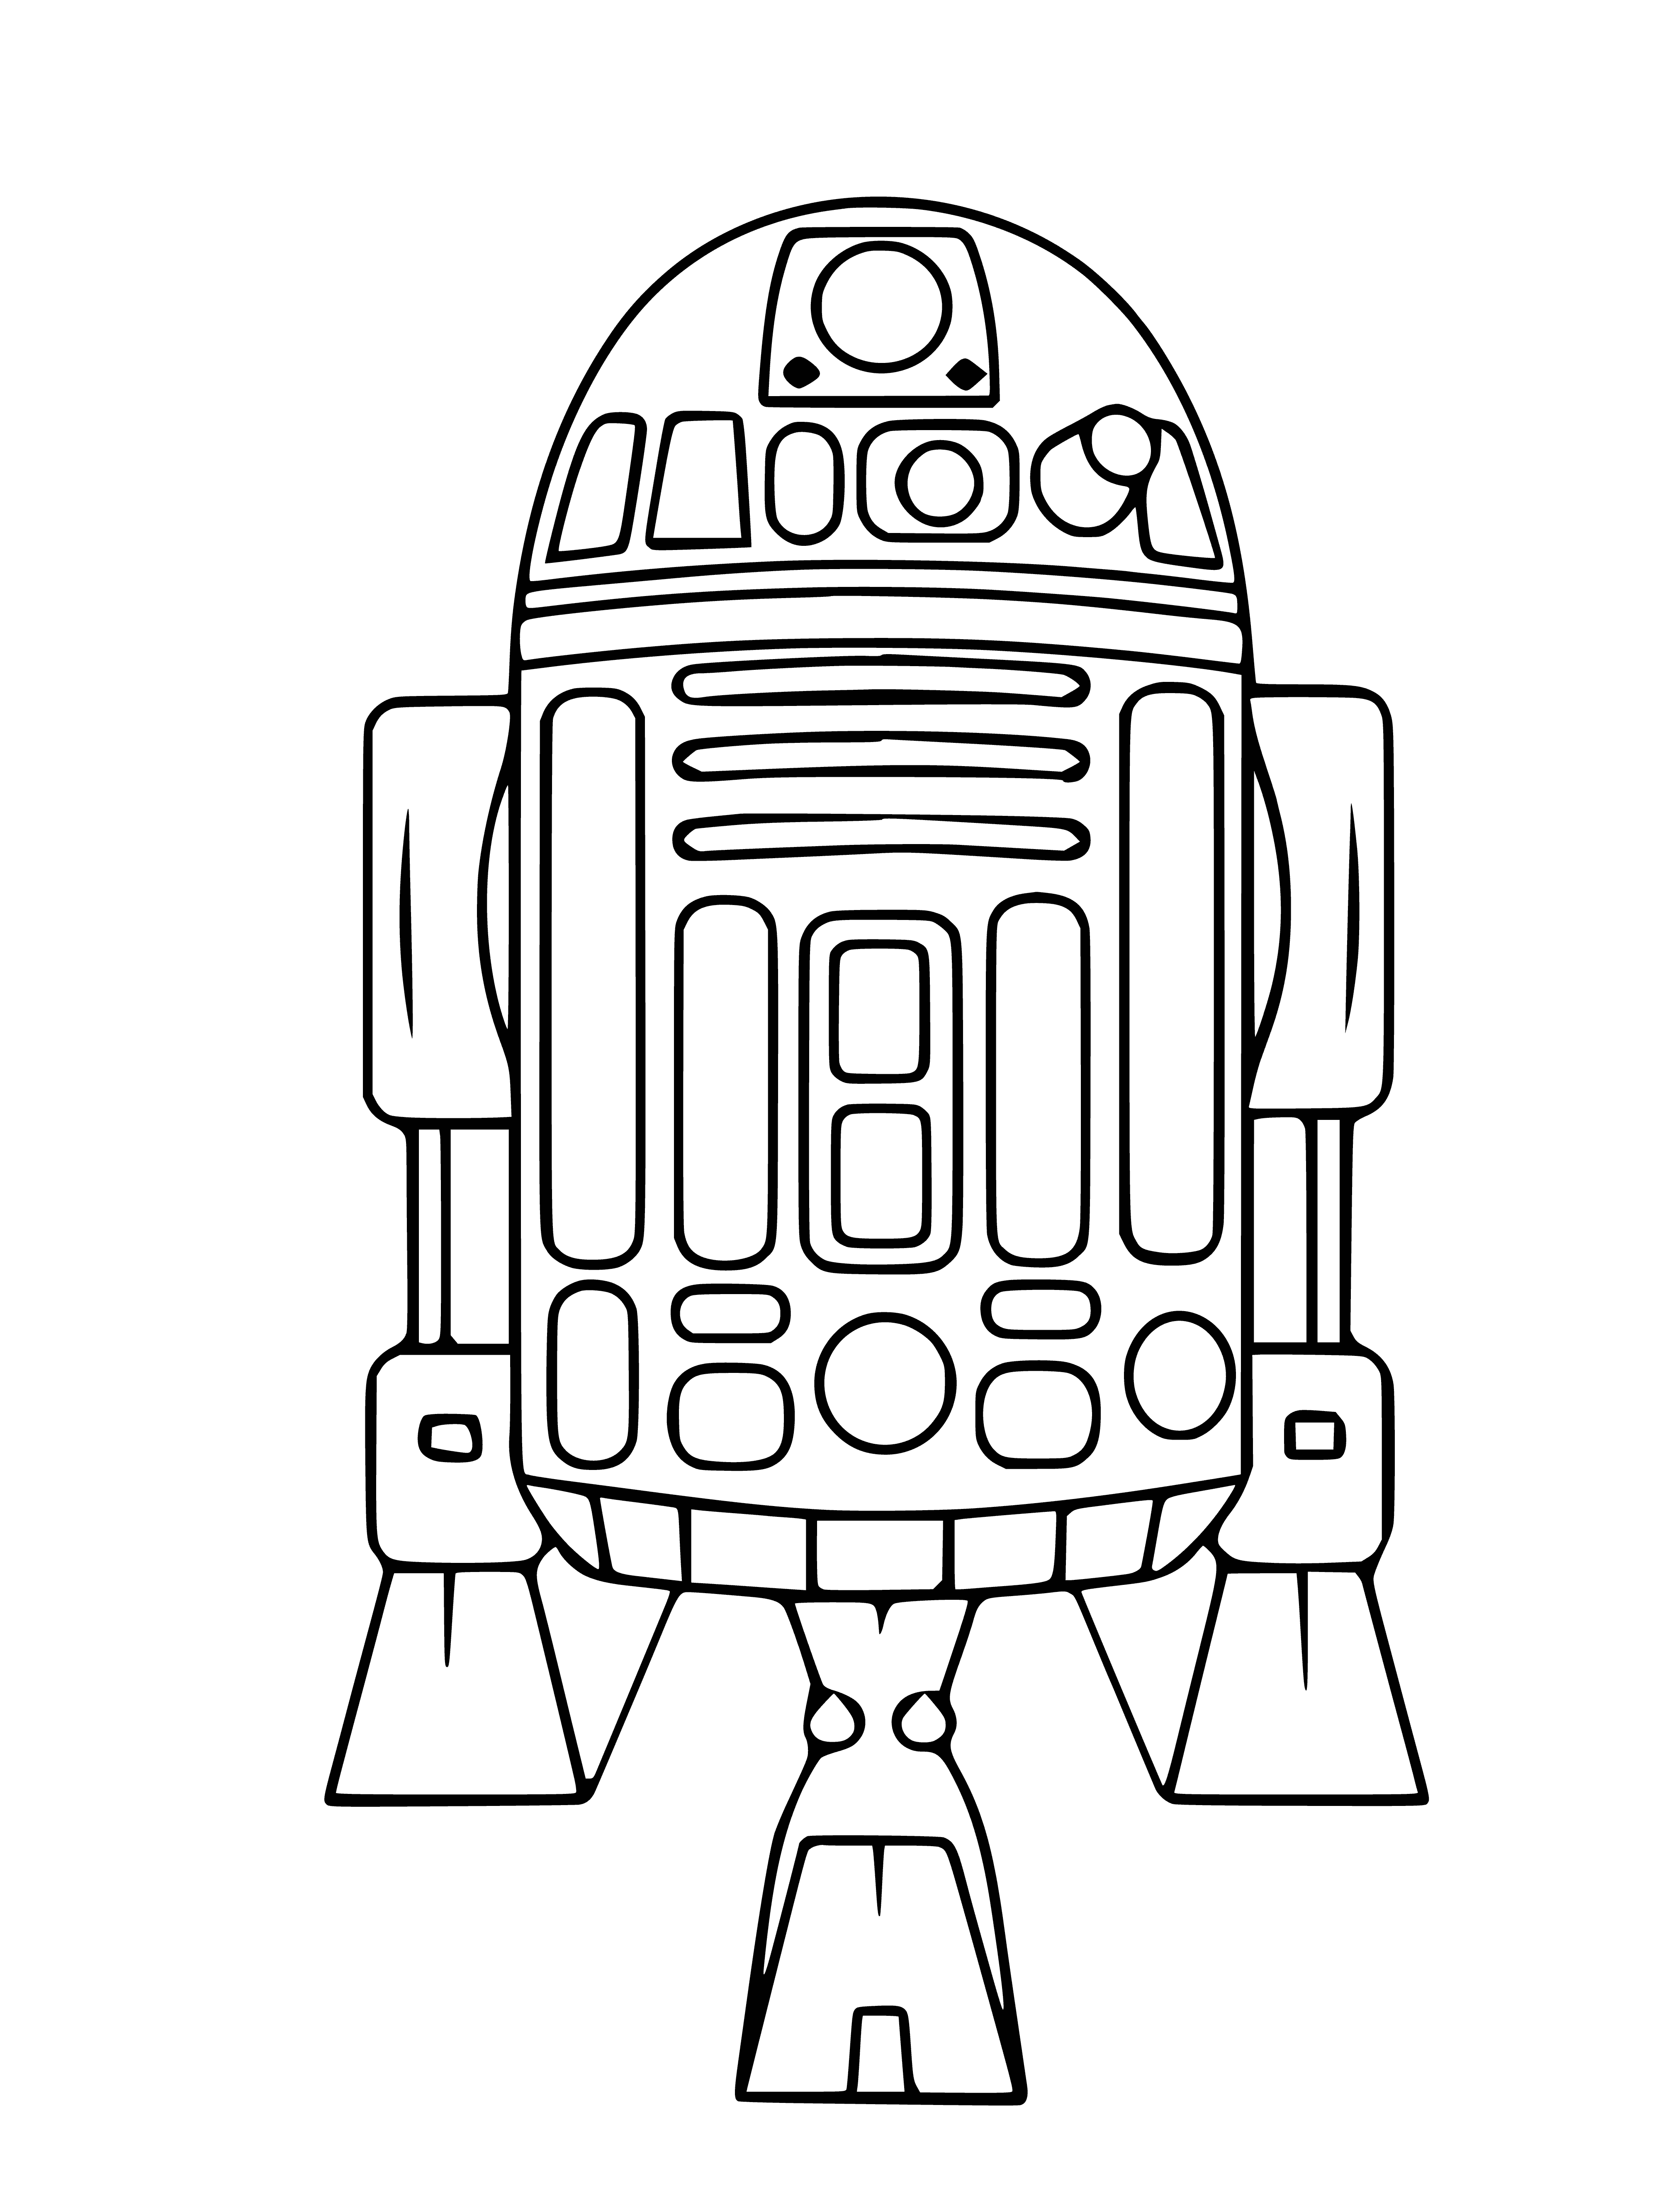 coloring page: R2-D2 stands on a metal platform in a room filled with computers & wires in the Star Wars movie universe. Two clawed arms, a large dome head & a chest control panel make up his shape.